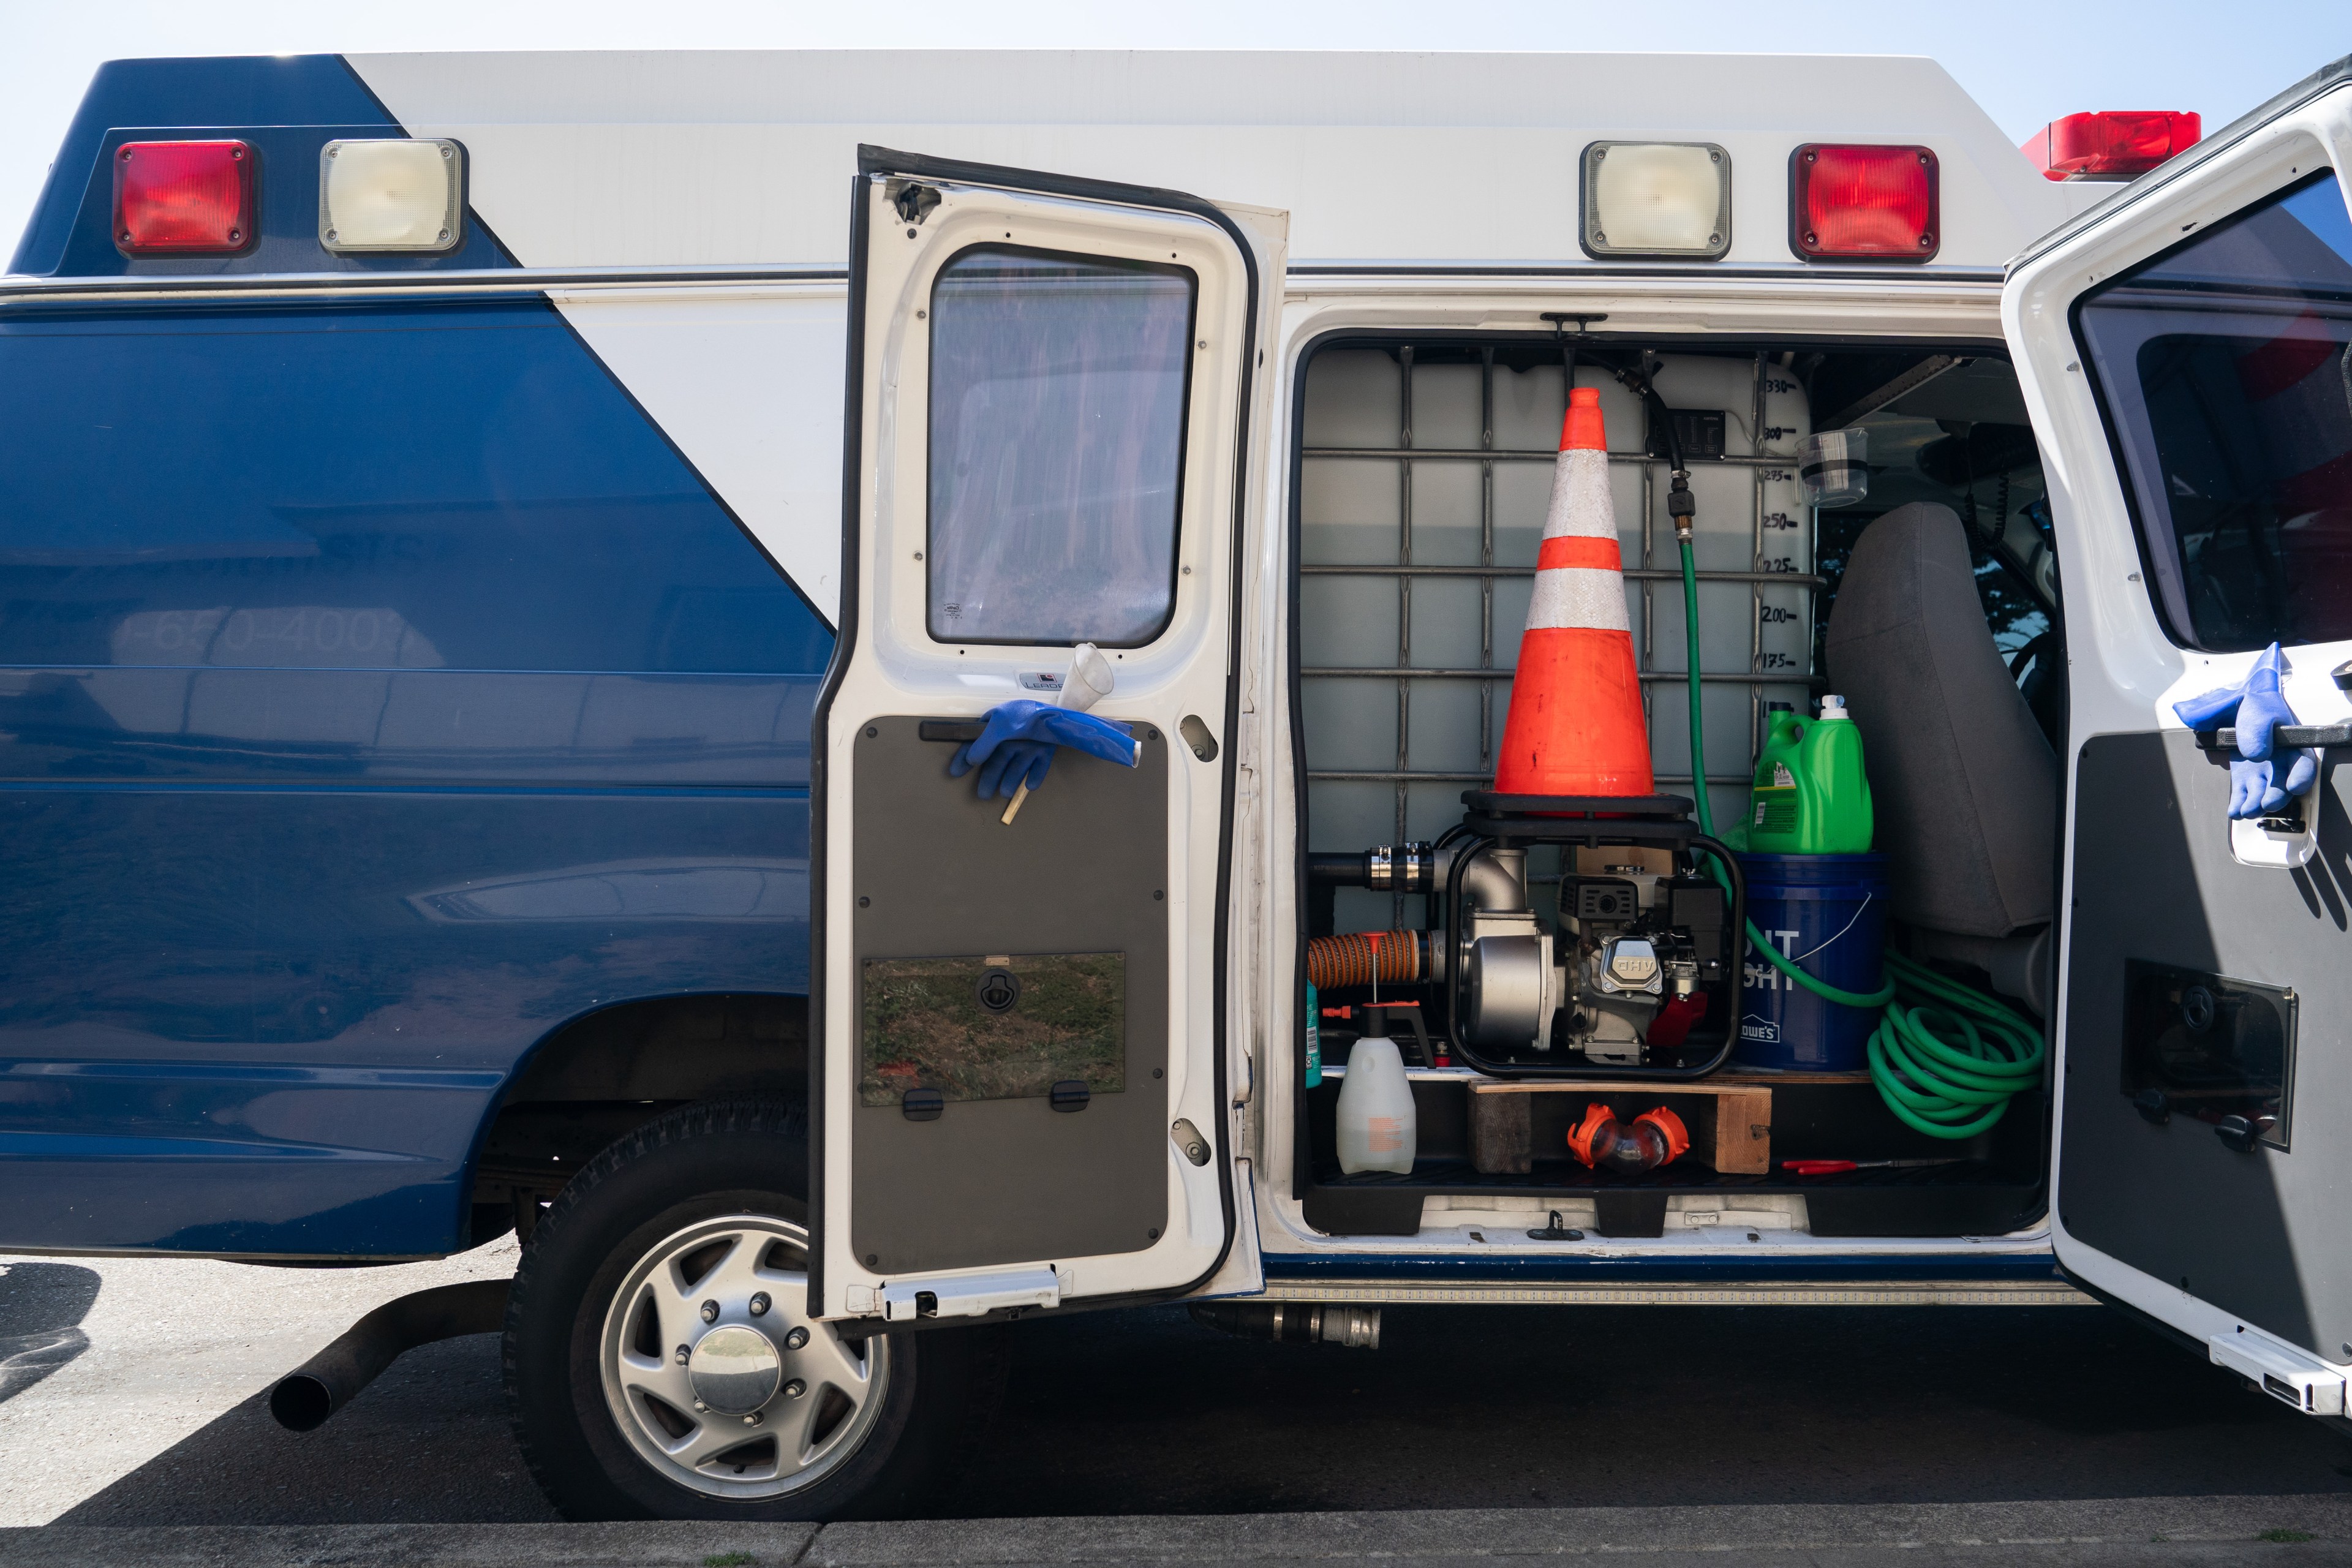 The back doors of a blue and white emergency vehicle are open, revealing equipment such as a traffic cone, green hose, motor, and cleaning supplies.